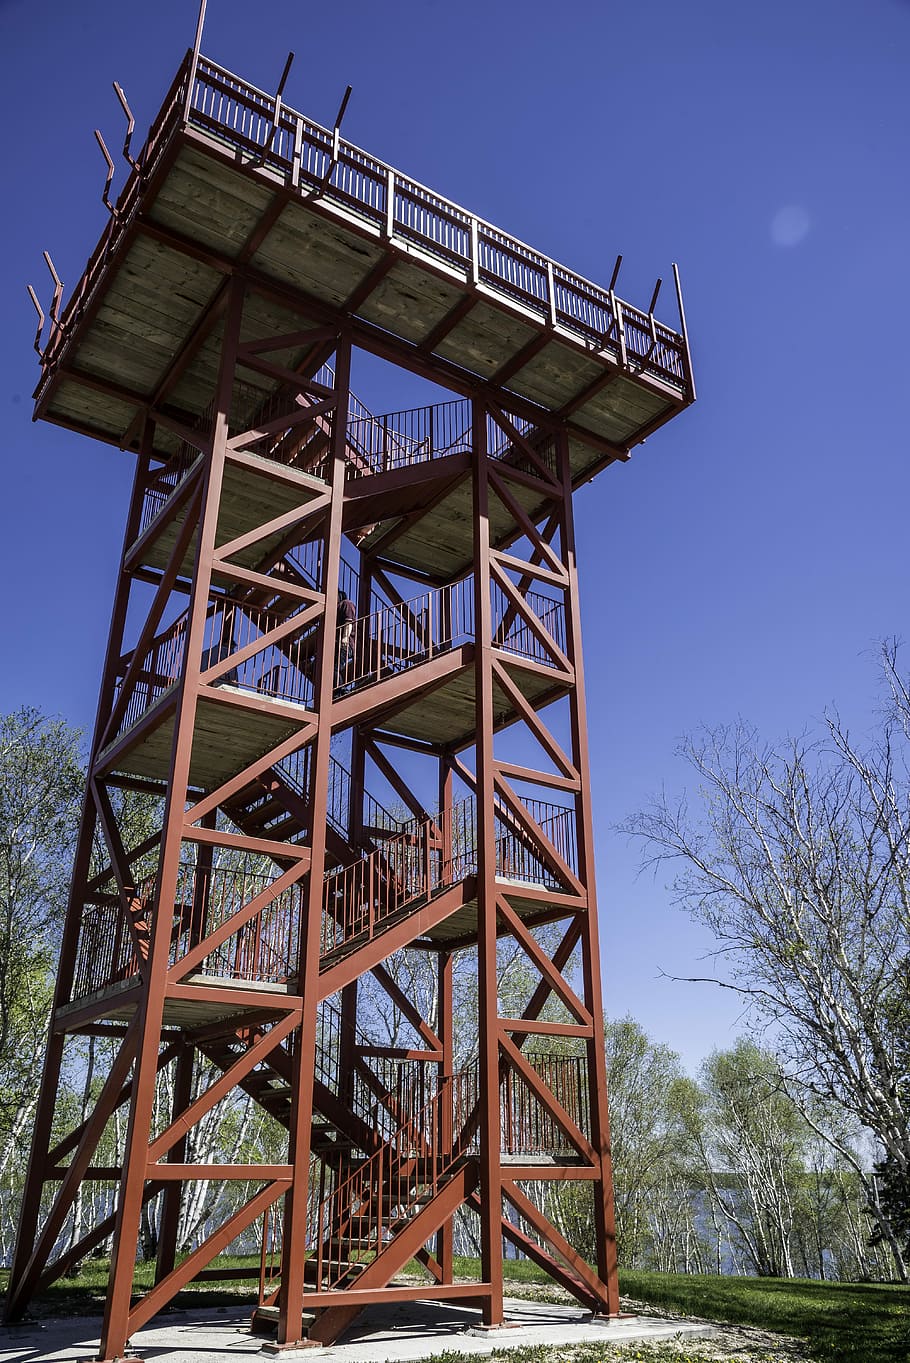 Observation Tower at Hecla Provincial Park, public domain, structure